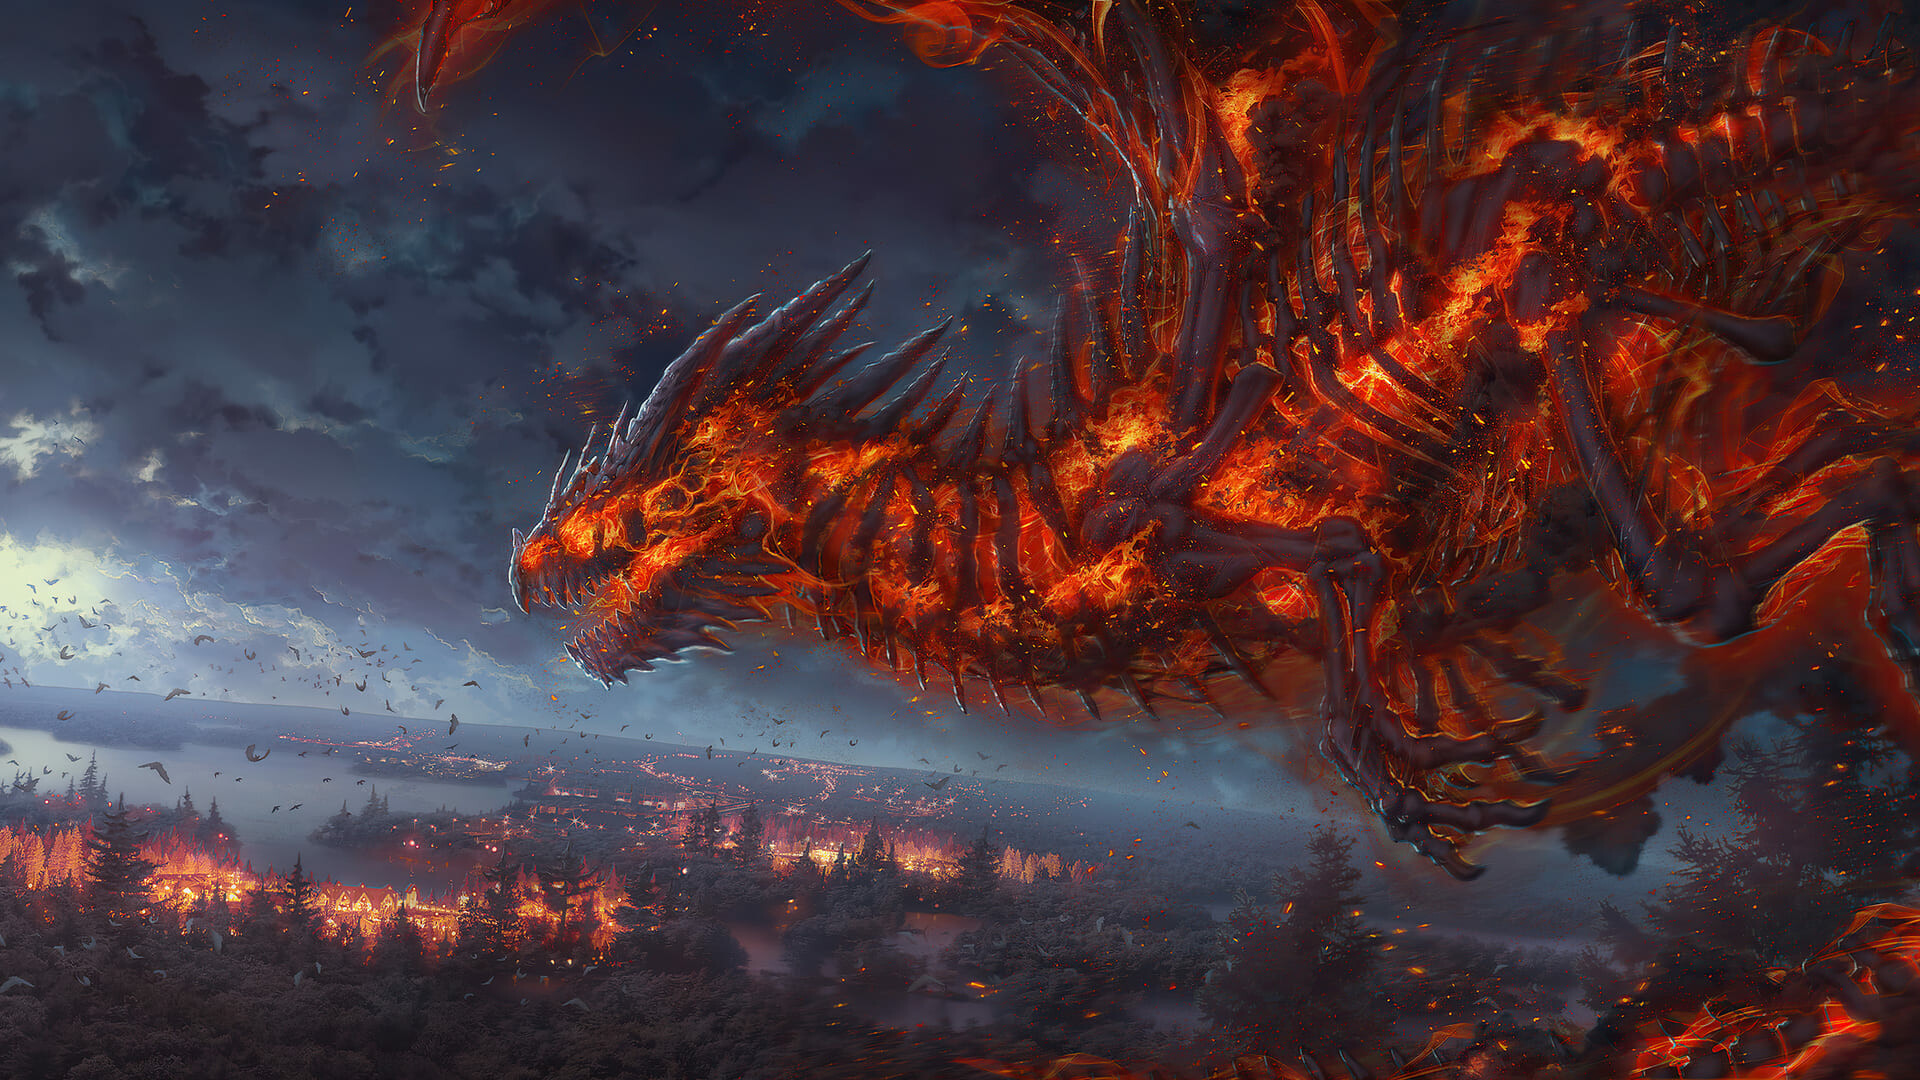 Dragon: Draco Ignis, One of the most well-known monsters of folklore. 1920x1080 Full HD Wallpaper.